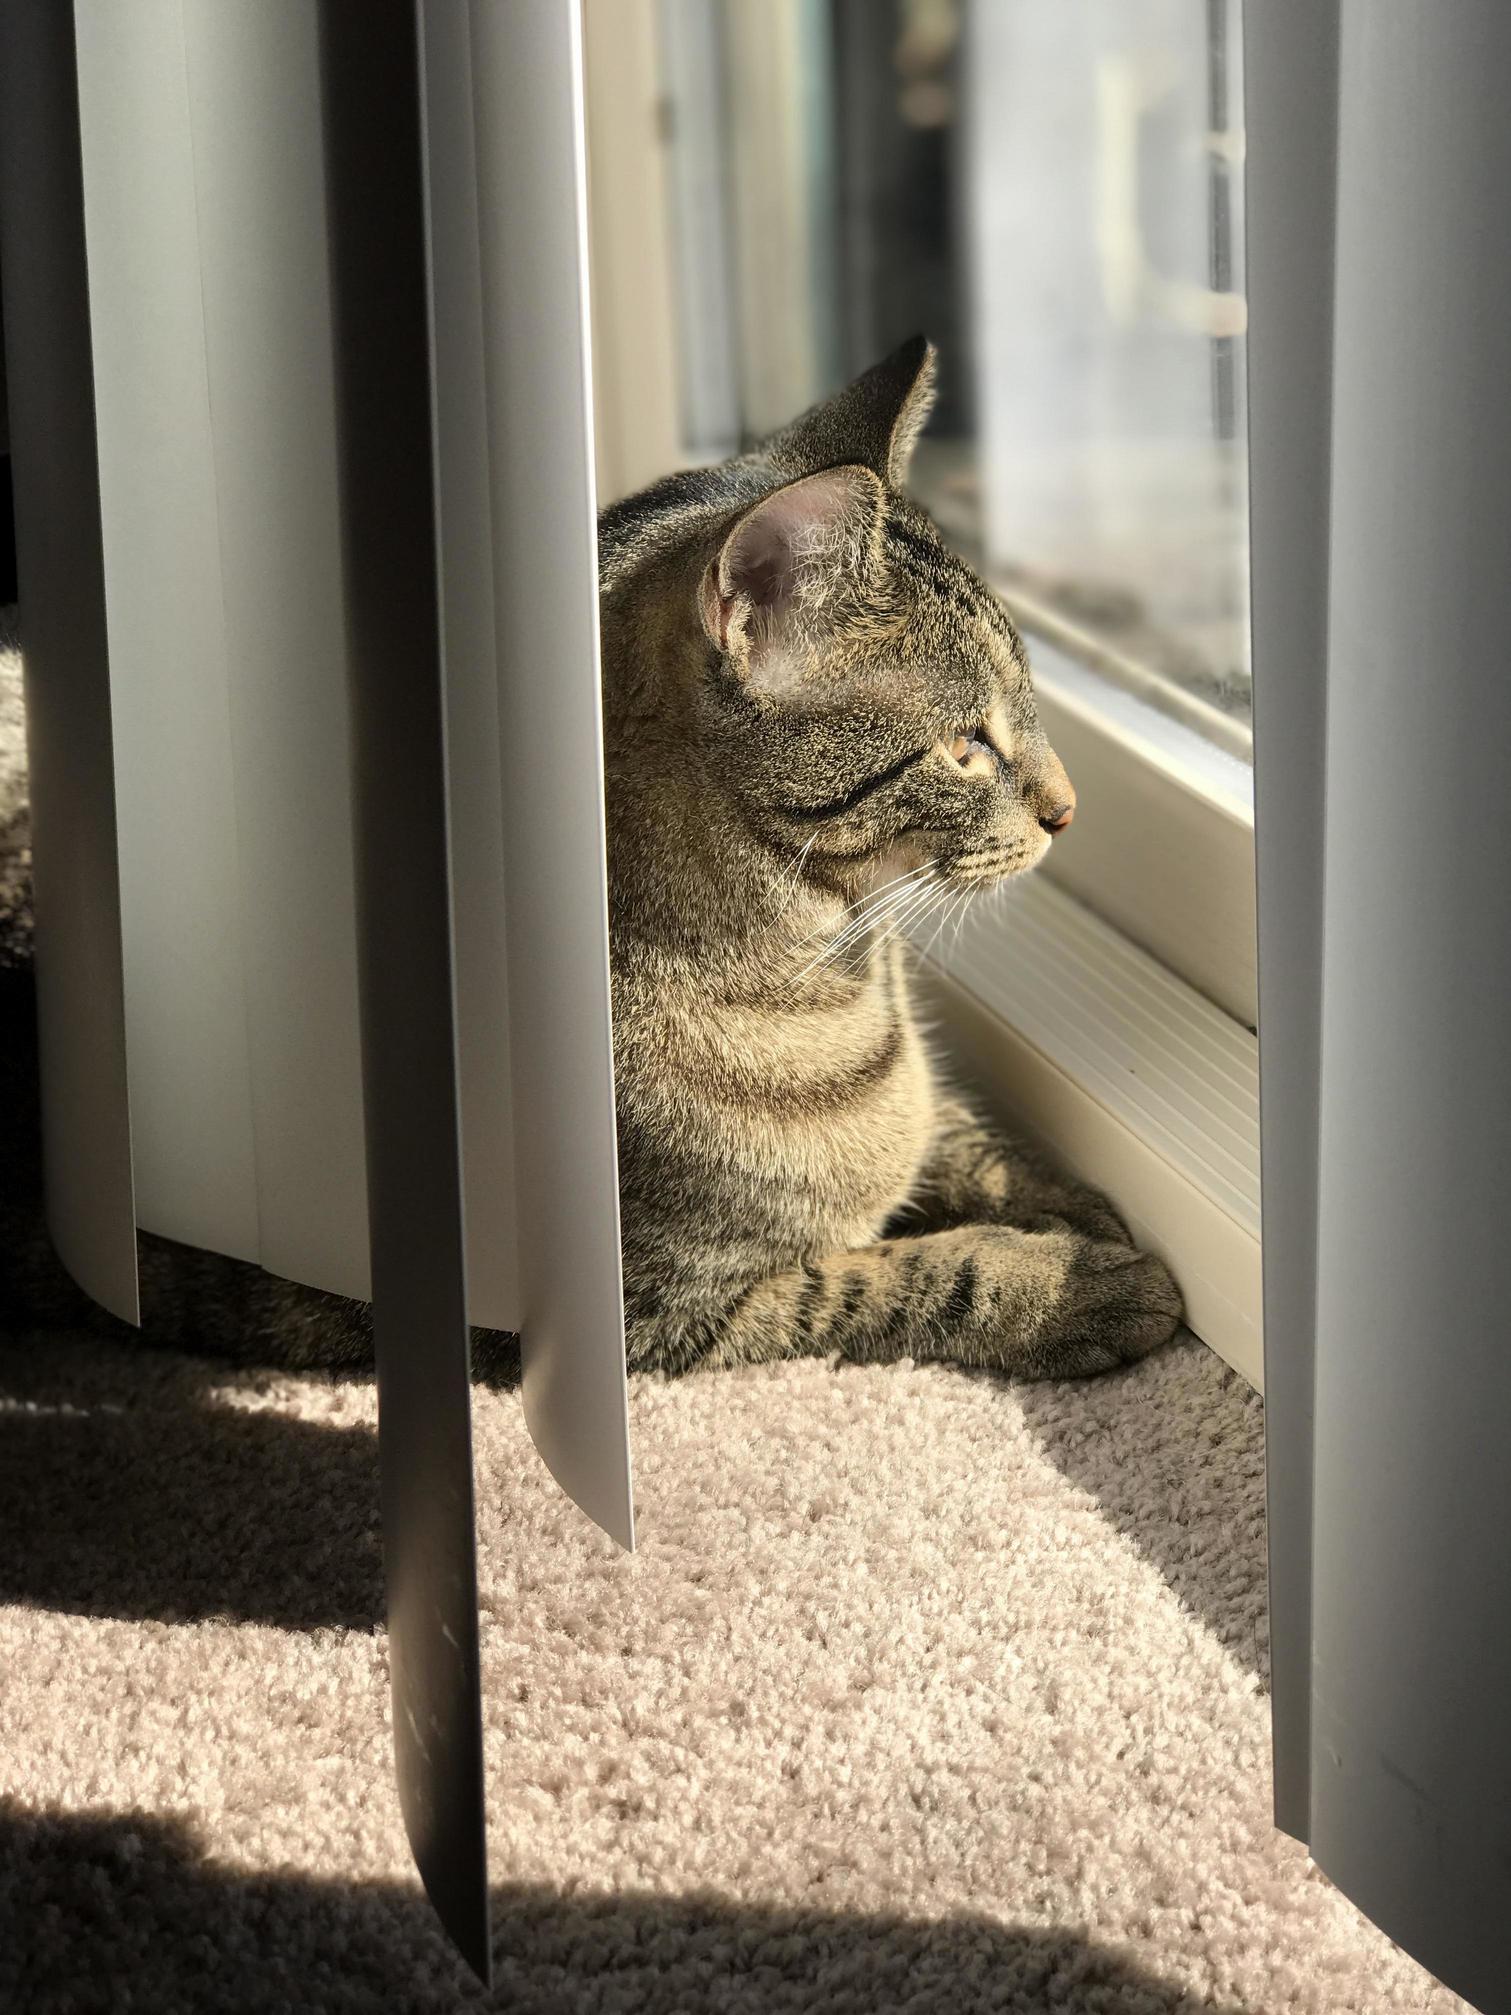 My cat loves looking out at the window and basking in the sun